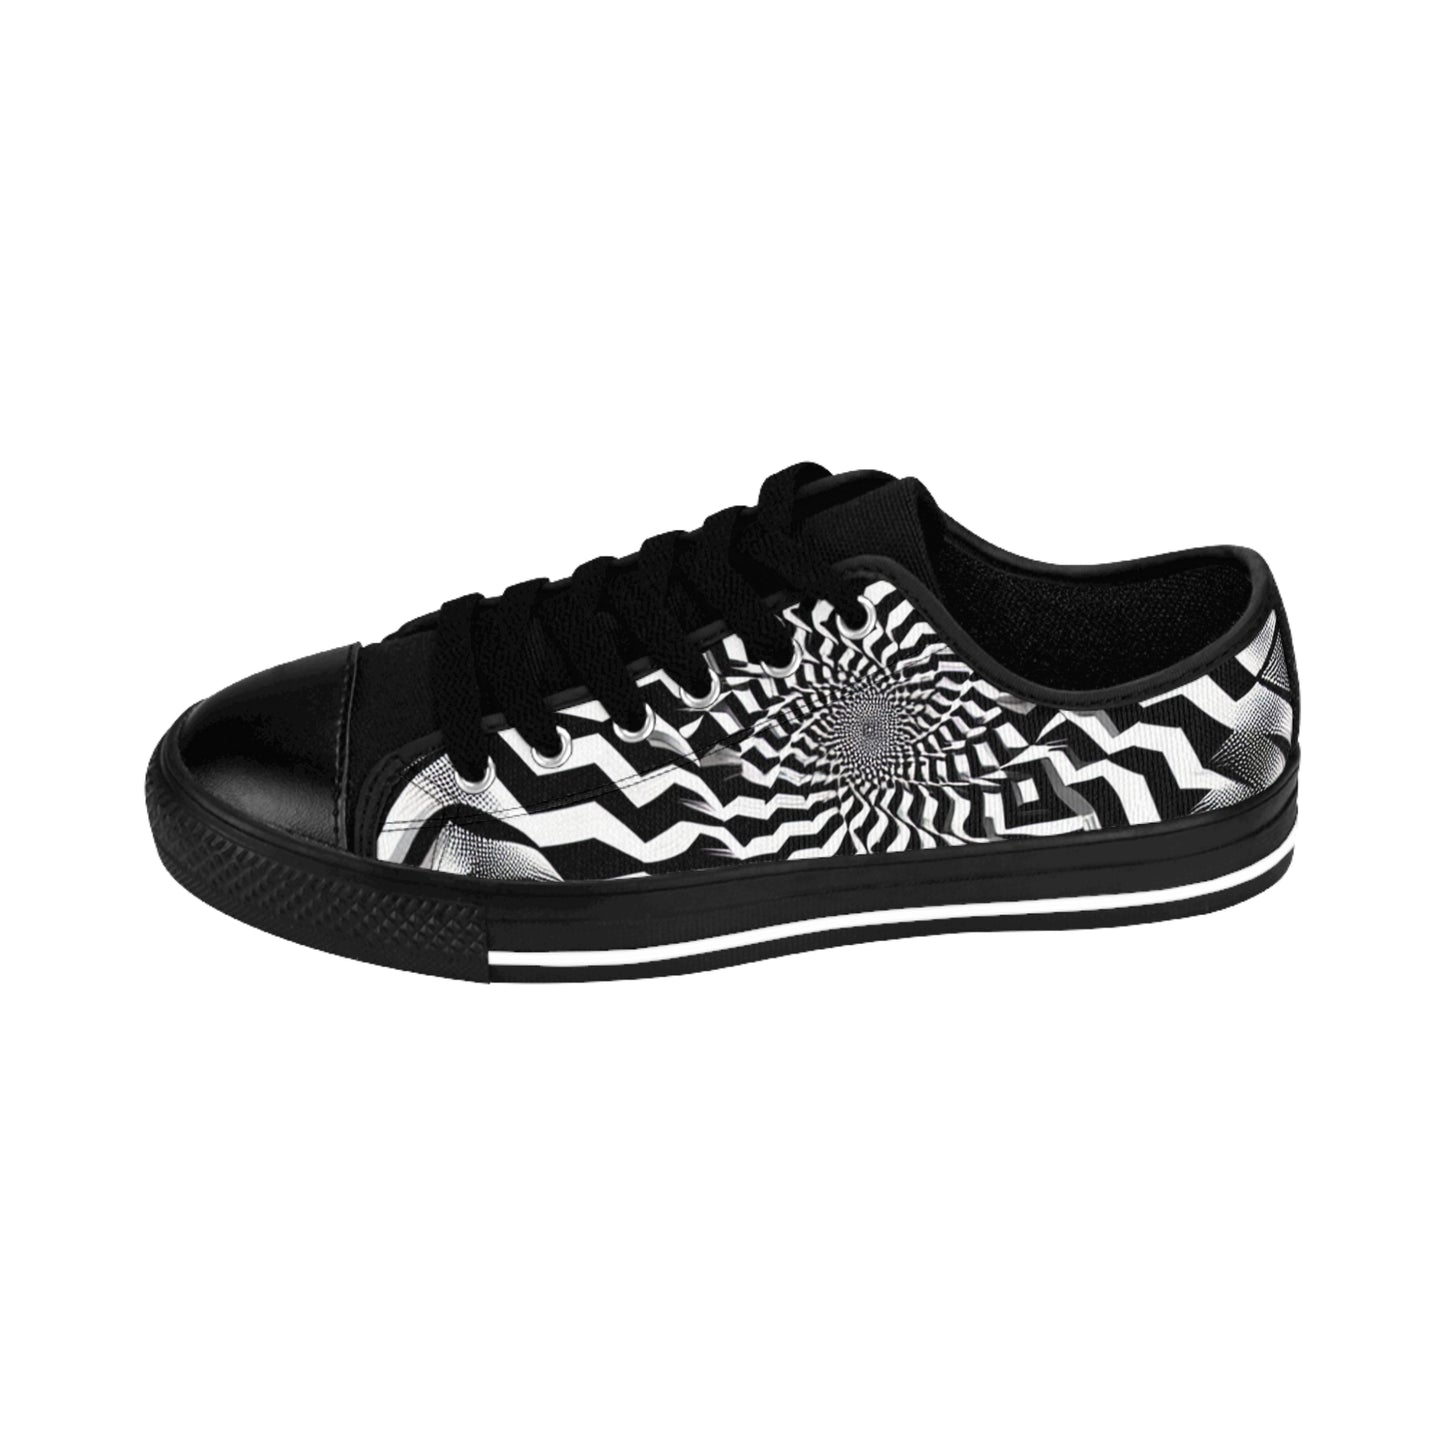 "HypnoDepth Canvas"- LowTop Shoes